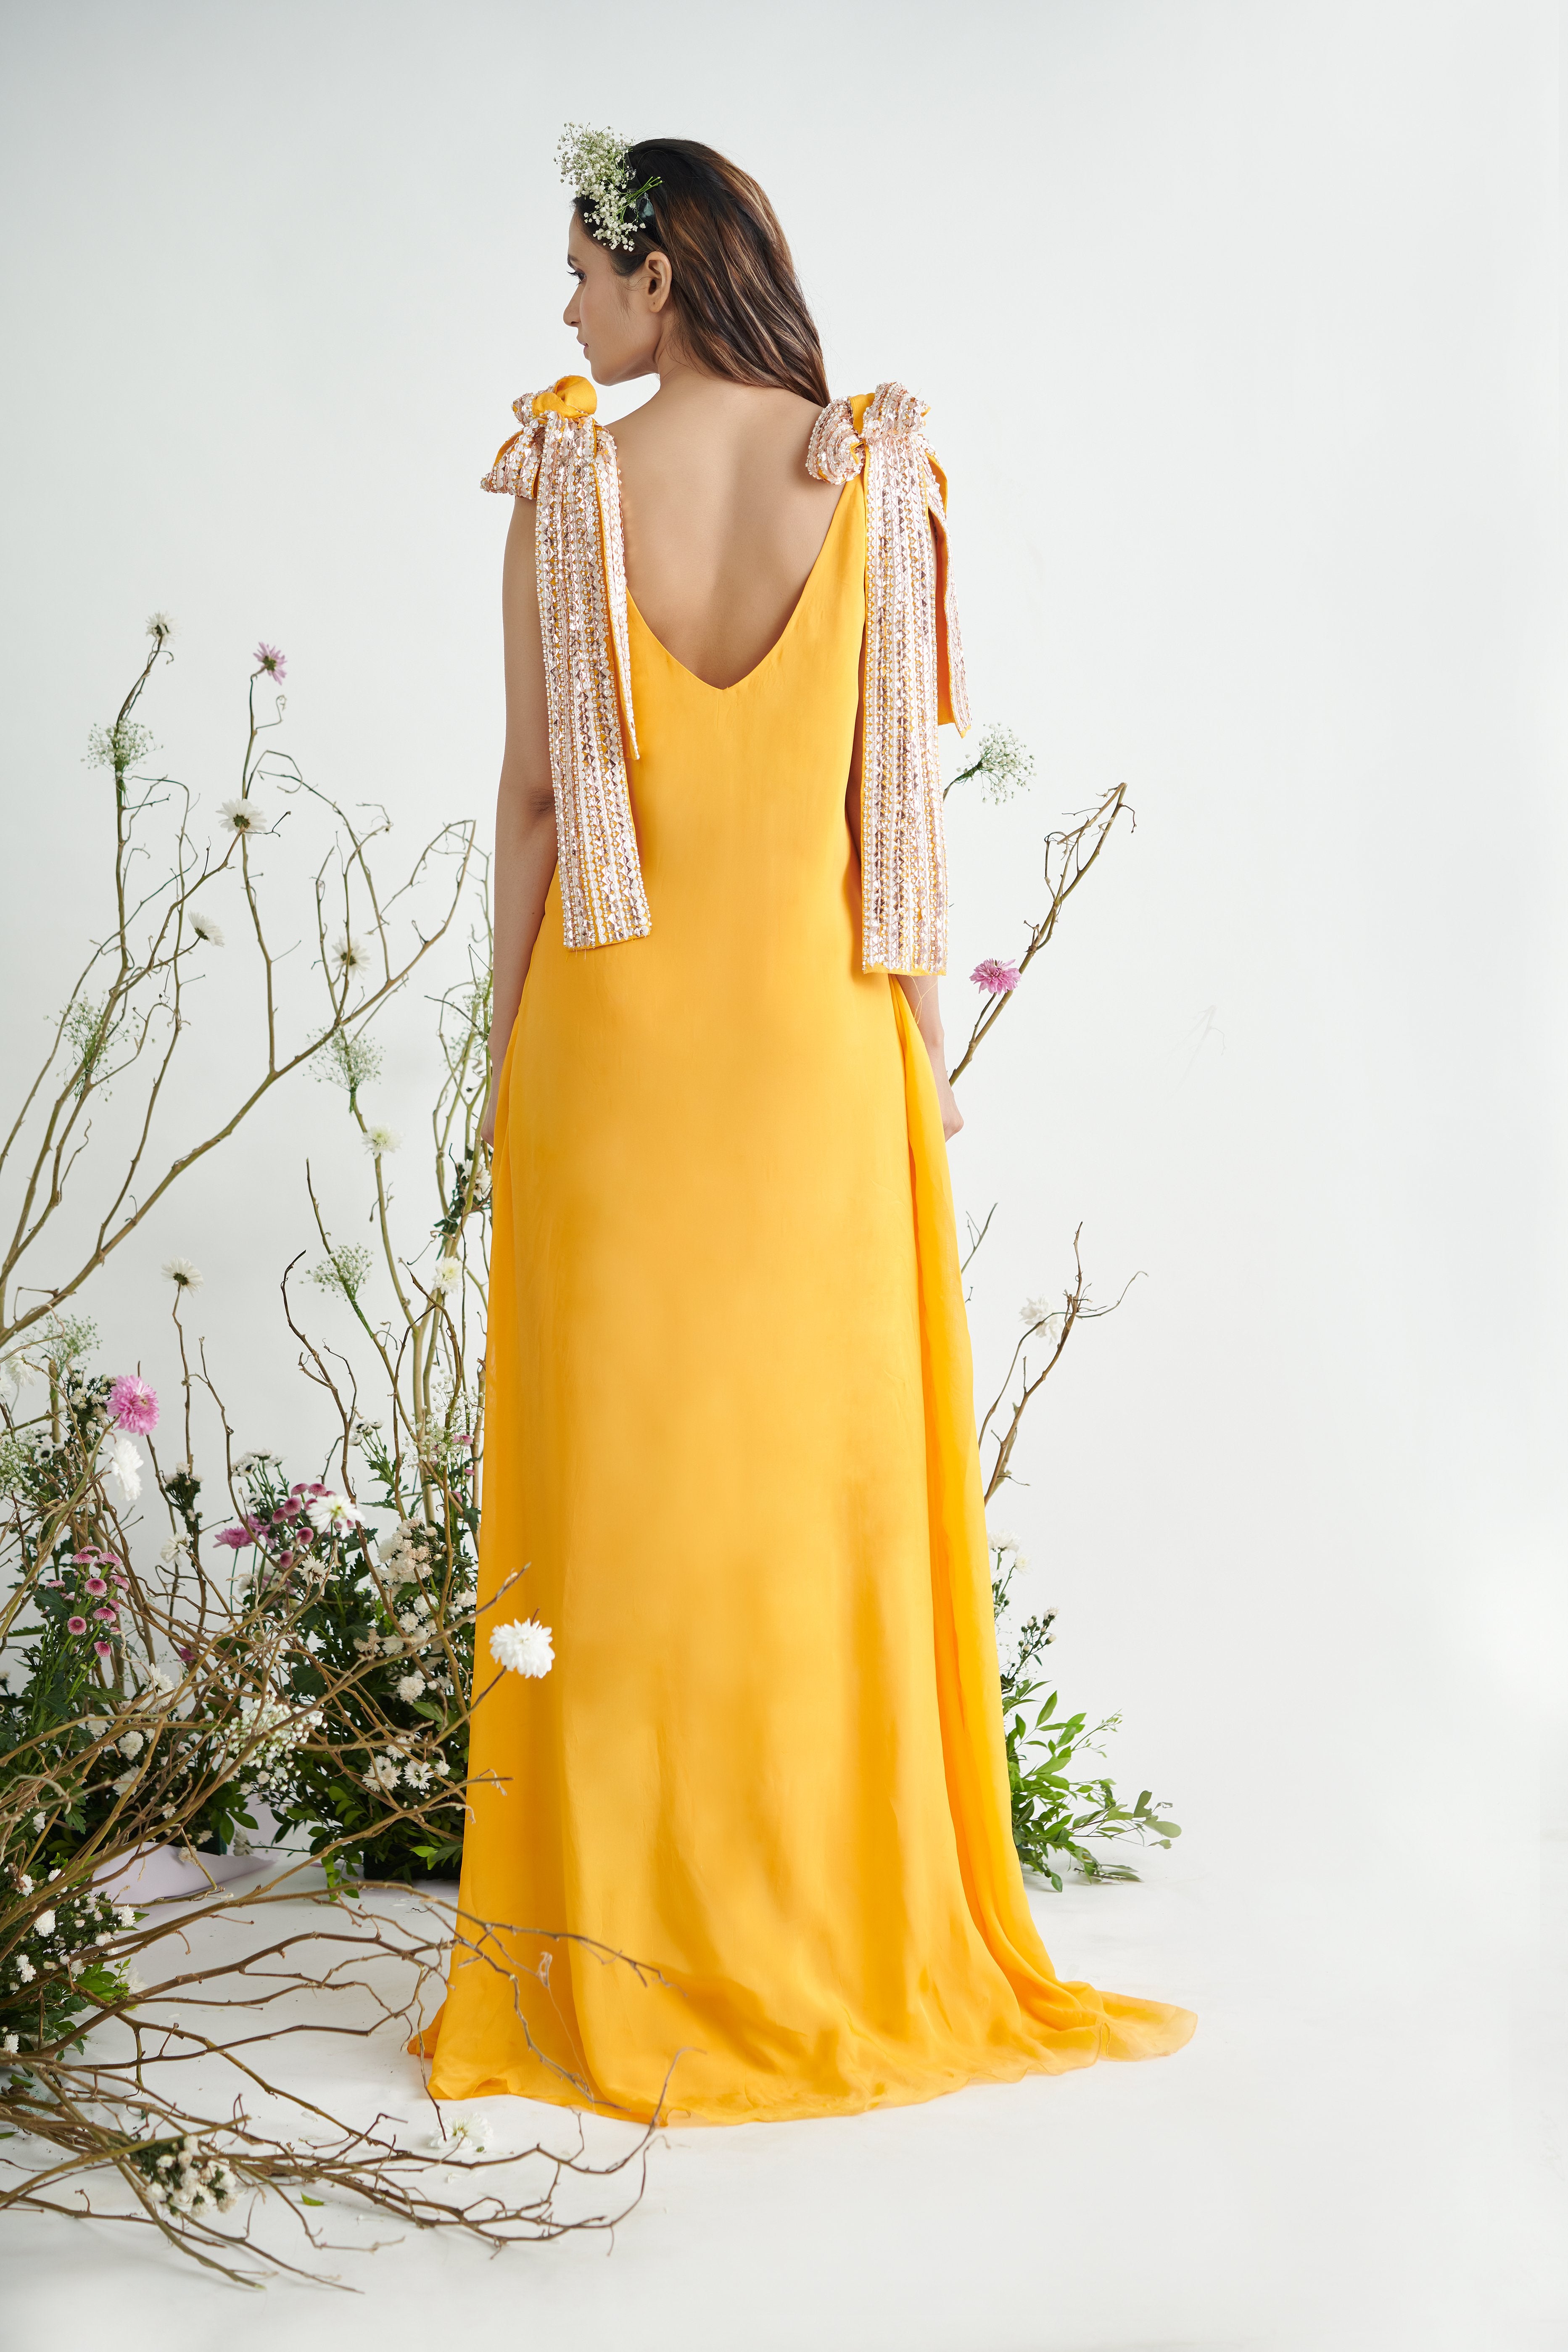 Pink Peacock Couture - Yellow Hand Embroidered Maxi Dress